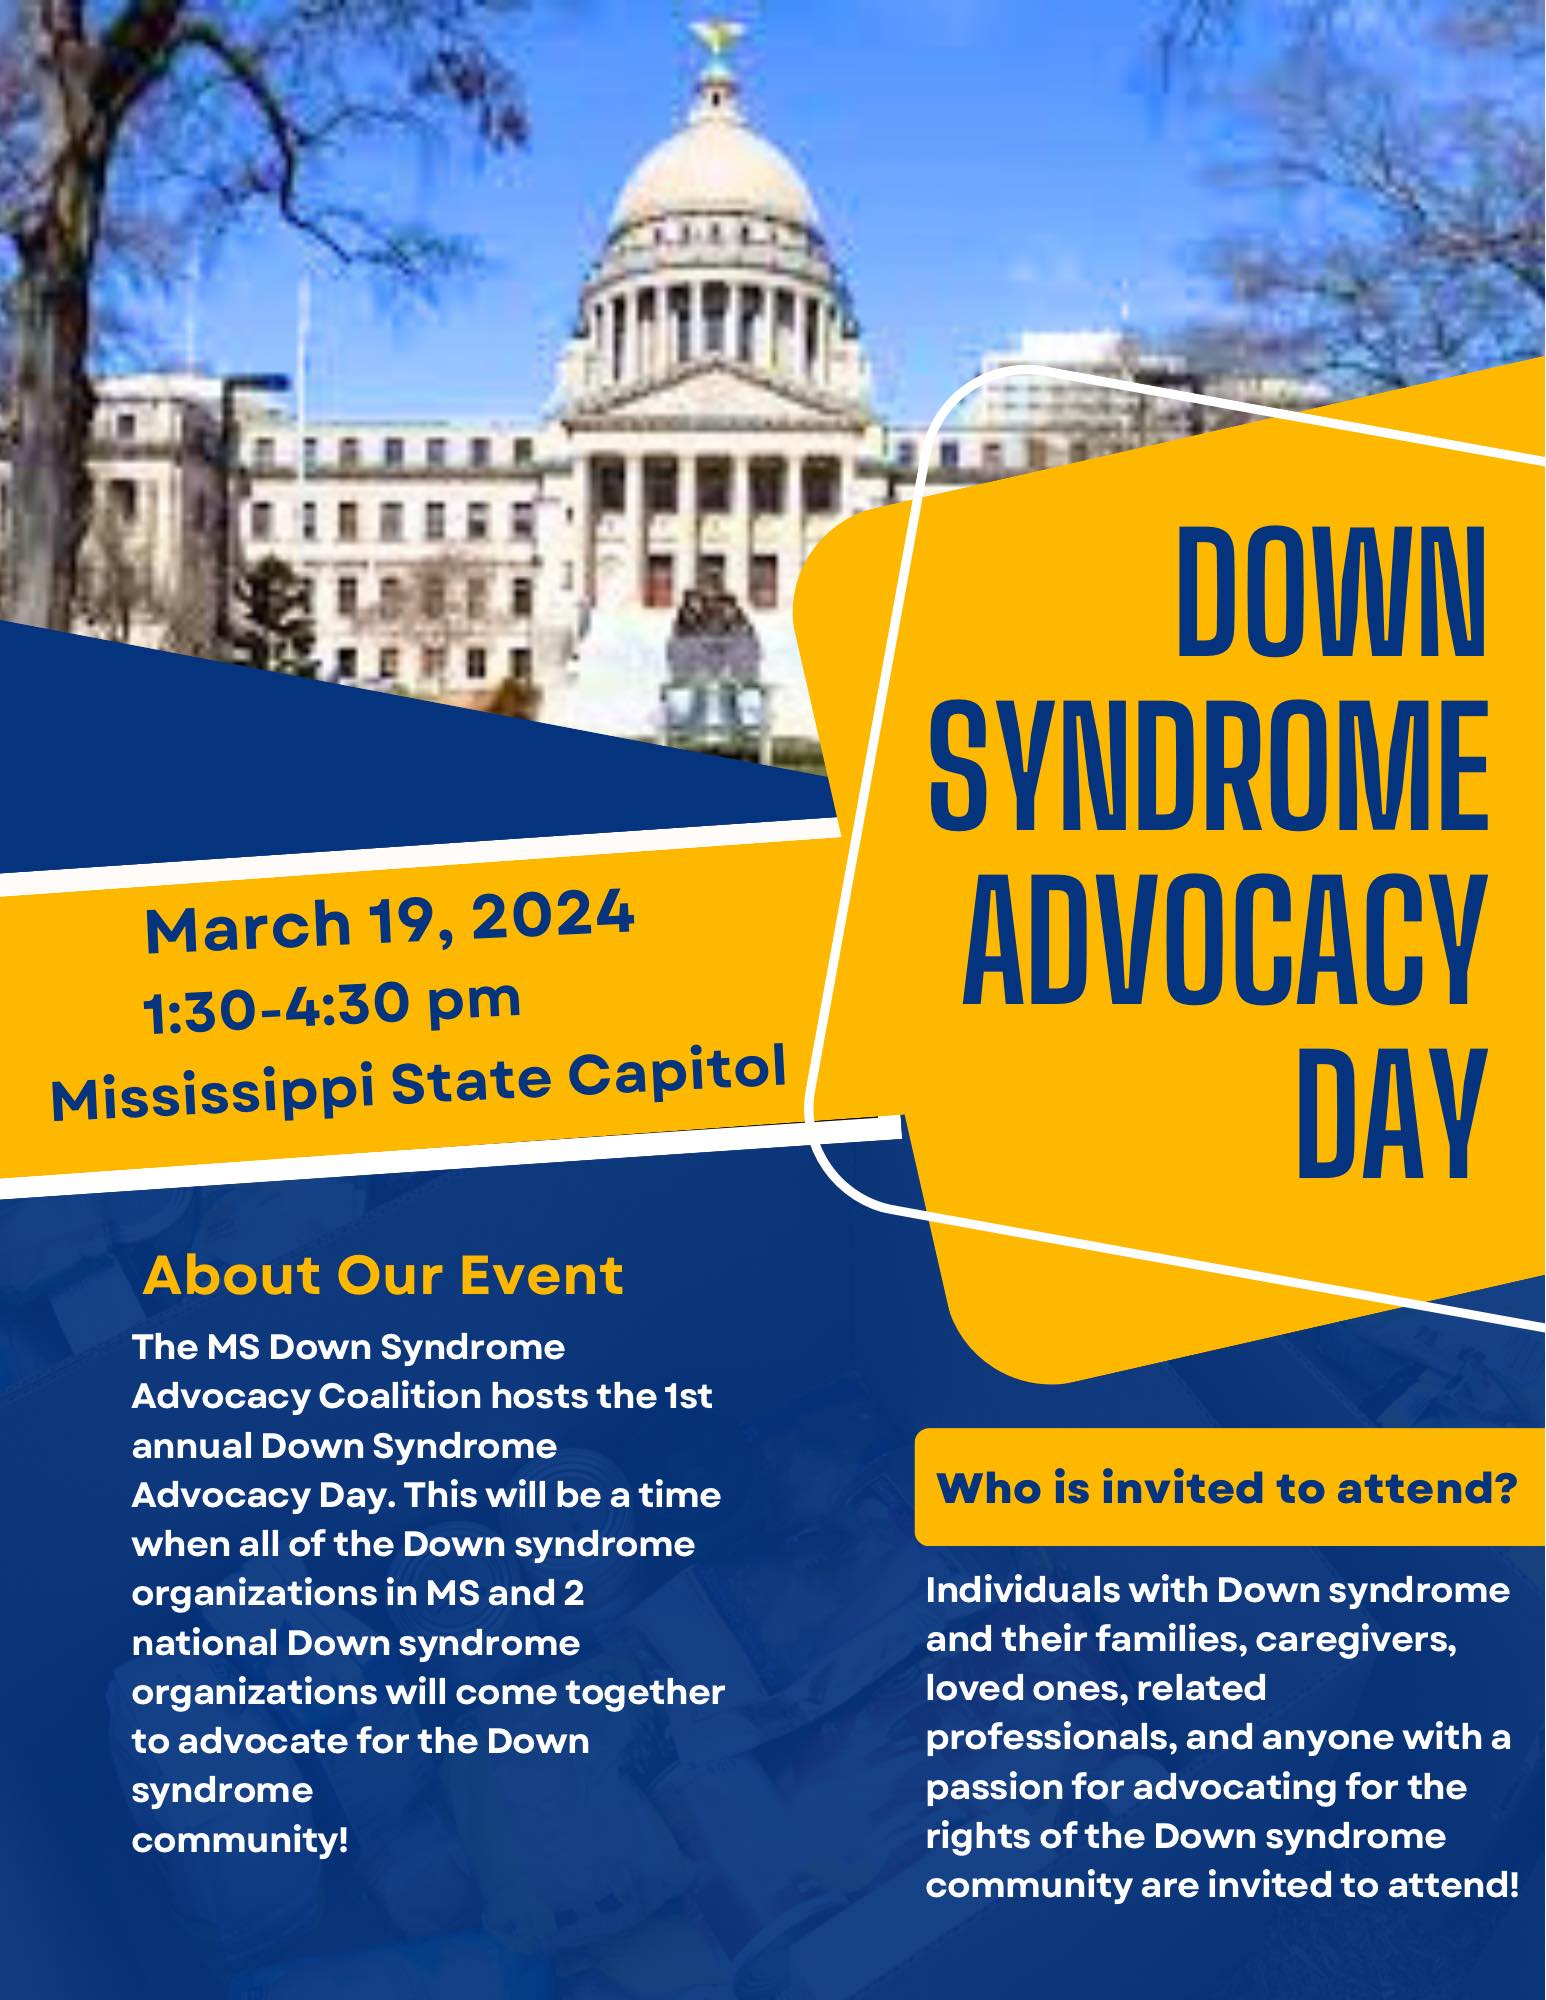 Down Syndrome Advocacy Day